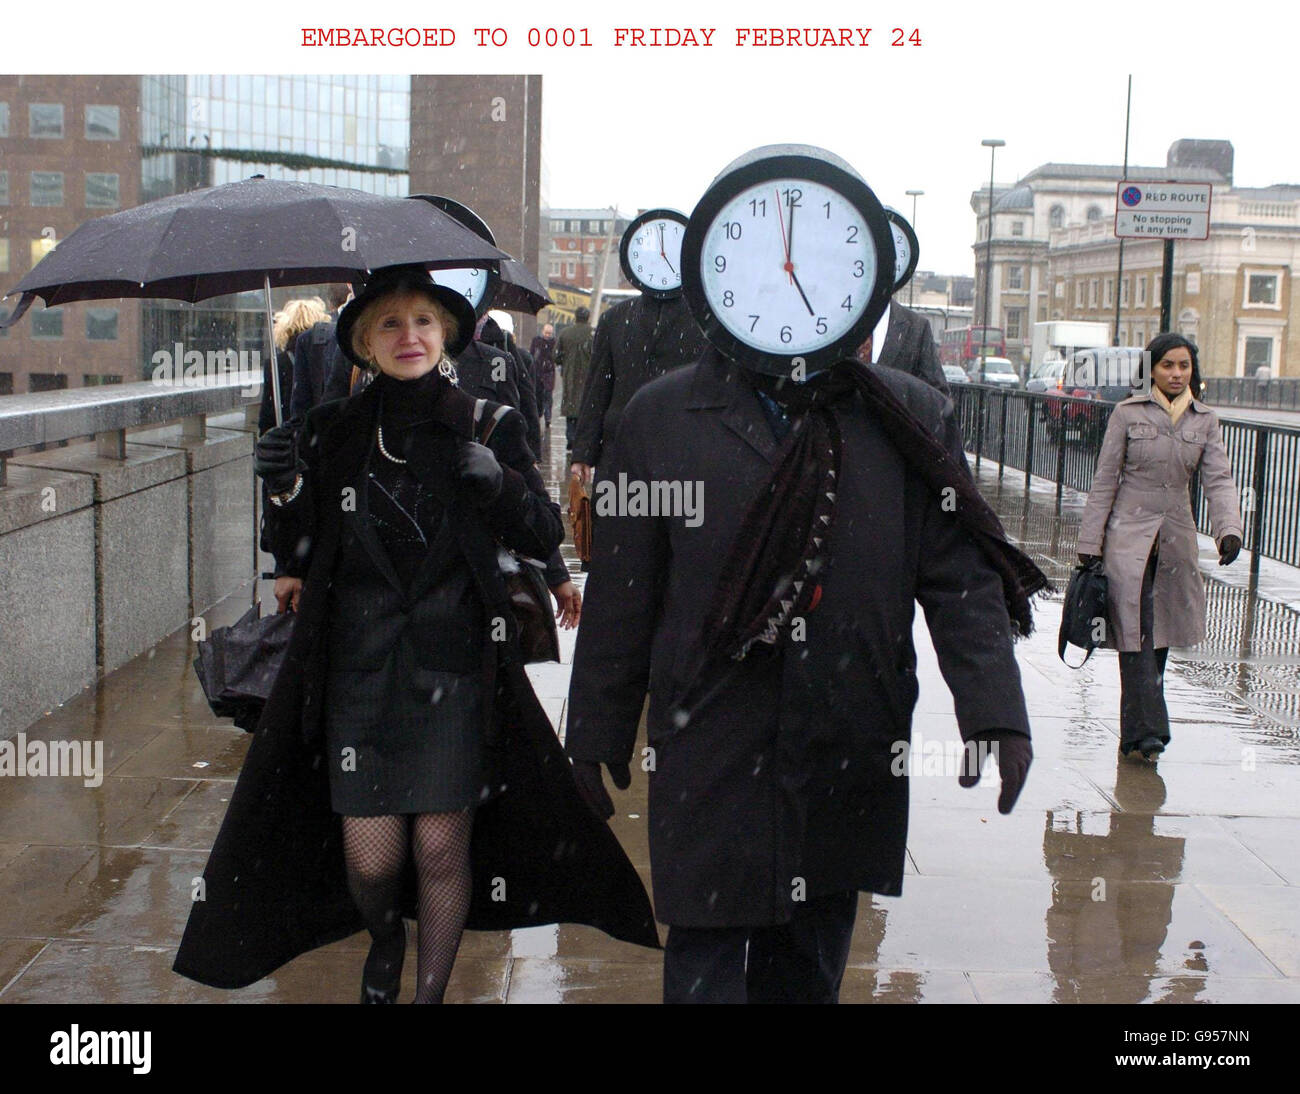 The Trade Union Congress (TUC) organise a stunt portraying commuters, some of whom are wearing clock-faces as masks with the time set at 5pm, walking across London Bridge in London, Thursday February 23, 2006. The stunt comes ahead of tomorrow's 'Work Your Proper Hours Day' when workers are being encouraged to arrive at work on time, take a proper lunch break and leave when they are meant to. PRESS ASSOCIATION Photo. Photo credit should read: Johnny Green/PA. Stock Photo